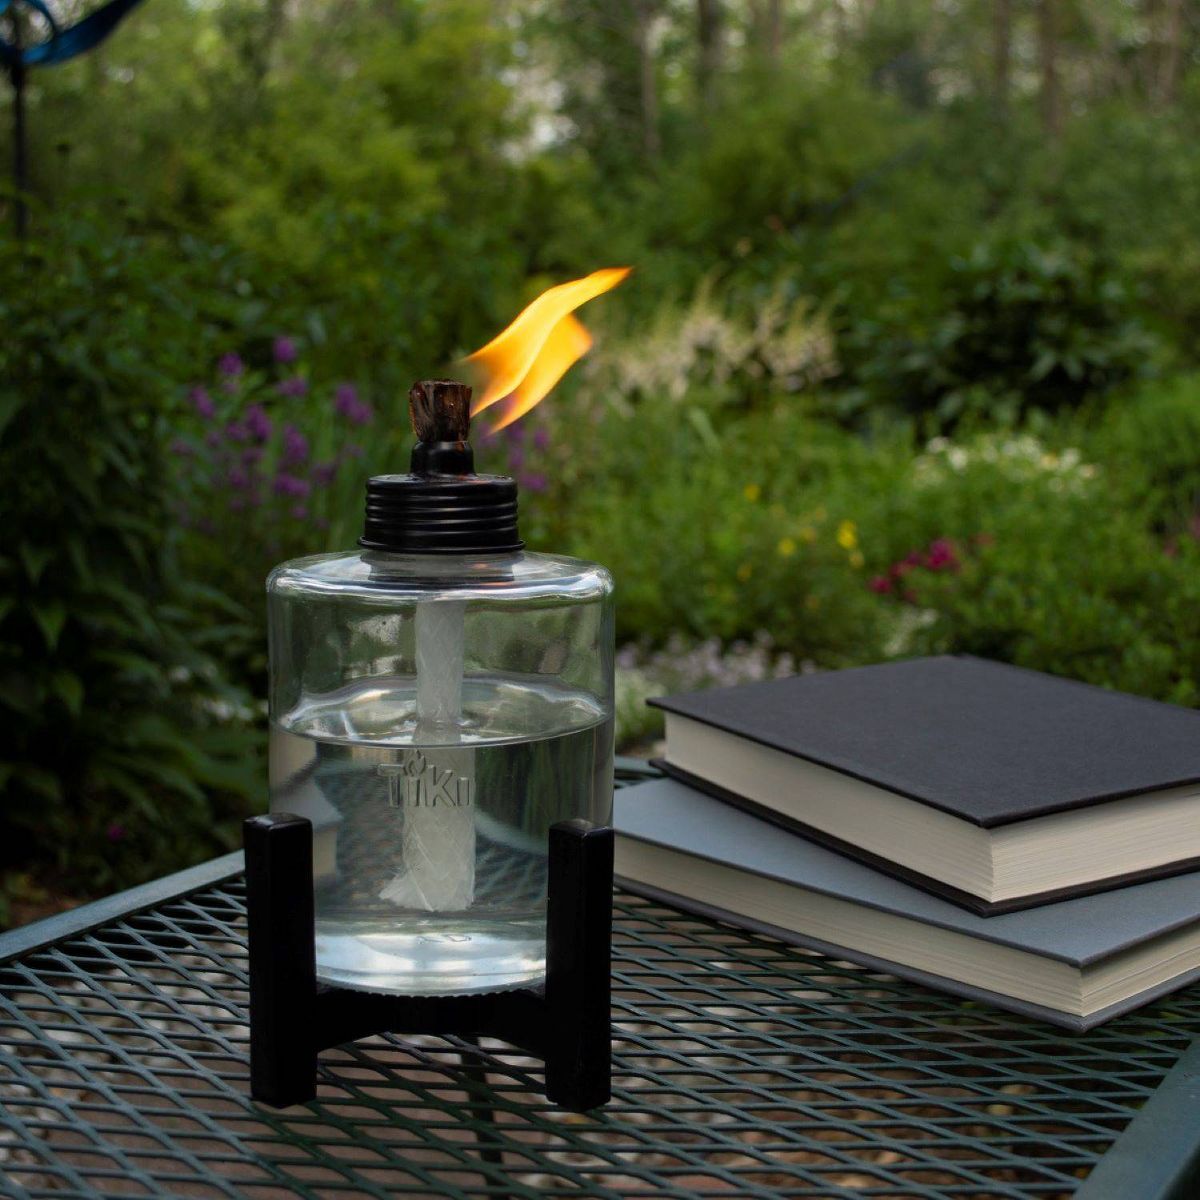 TIKI Elevated Tall Glass Tabletop Outdoor Torch | Target